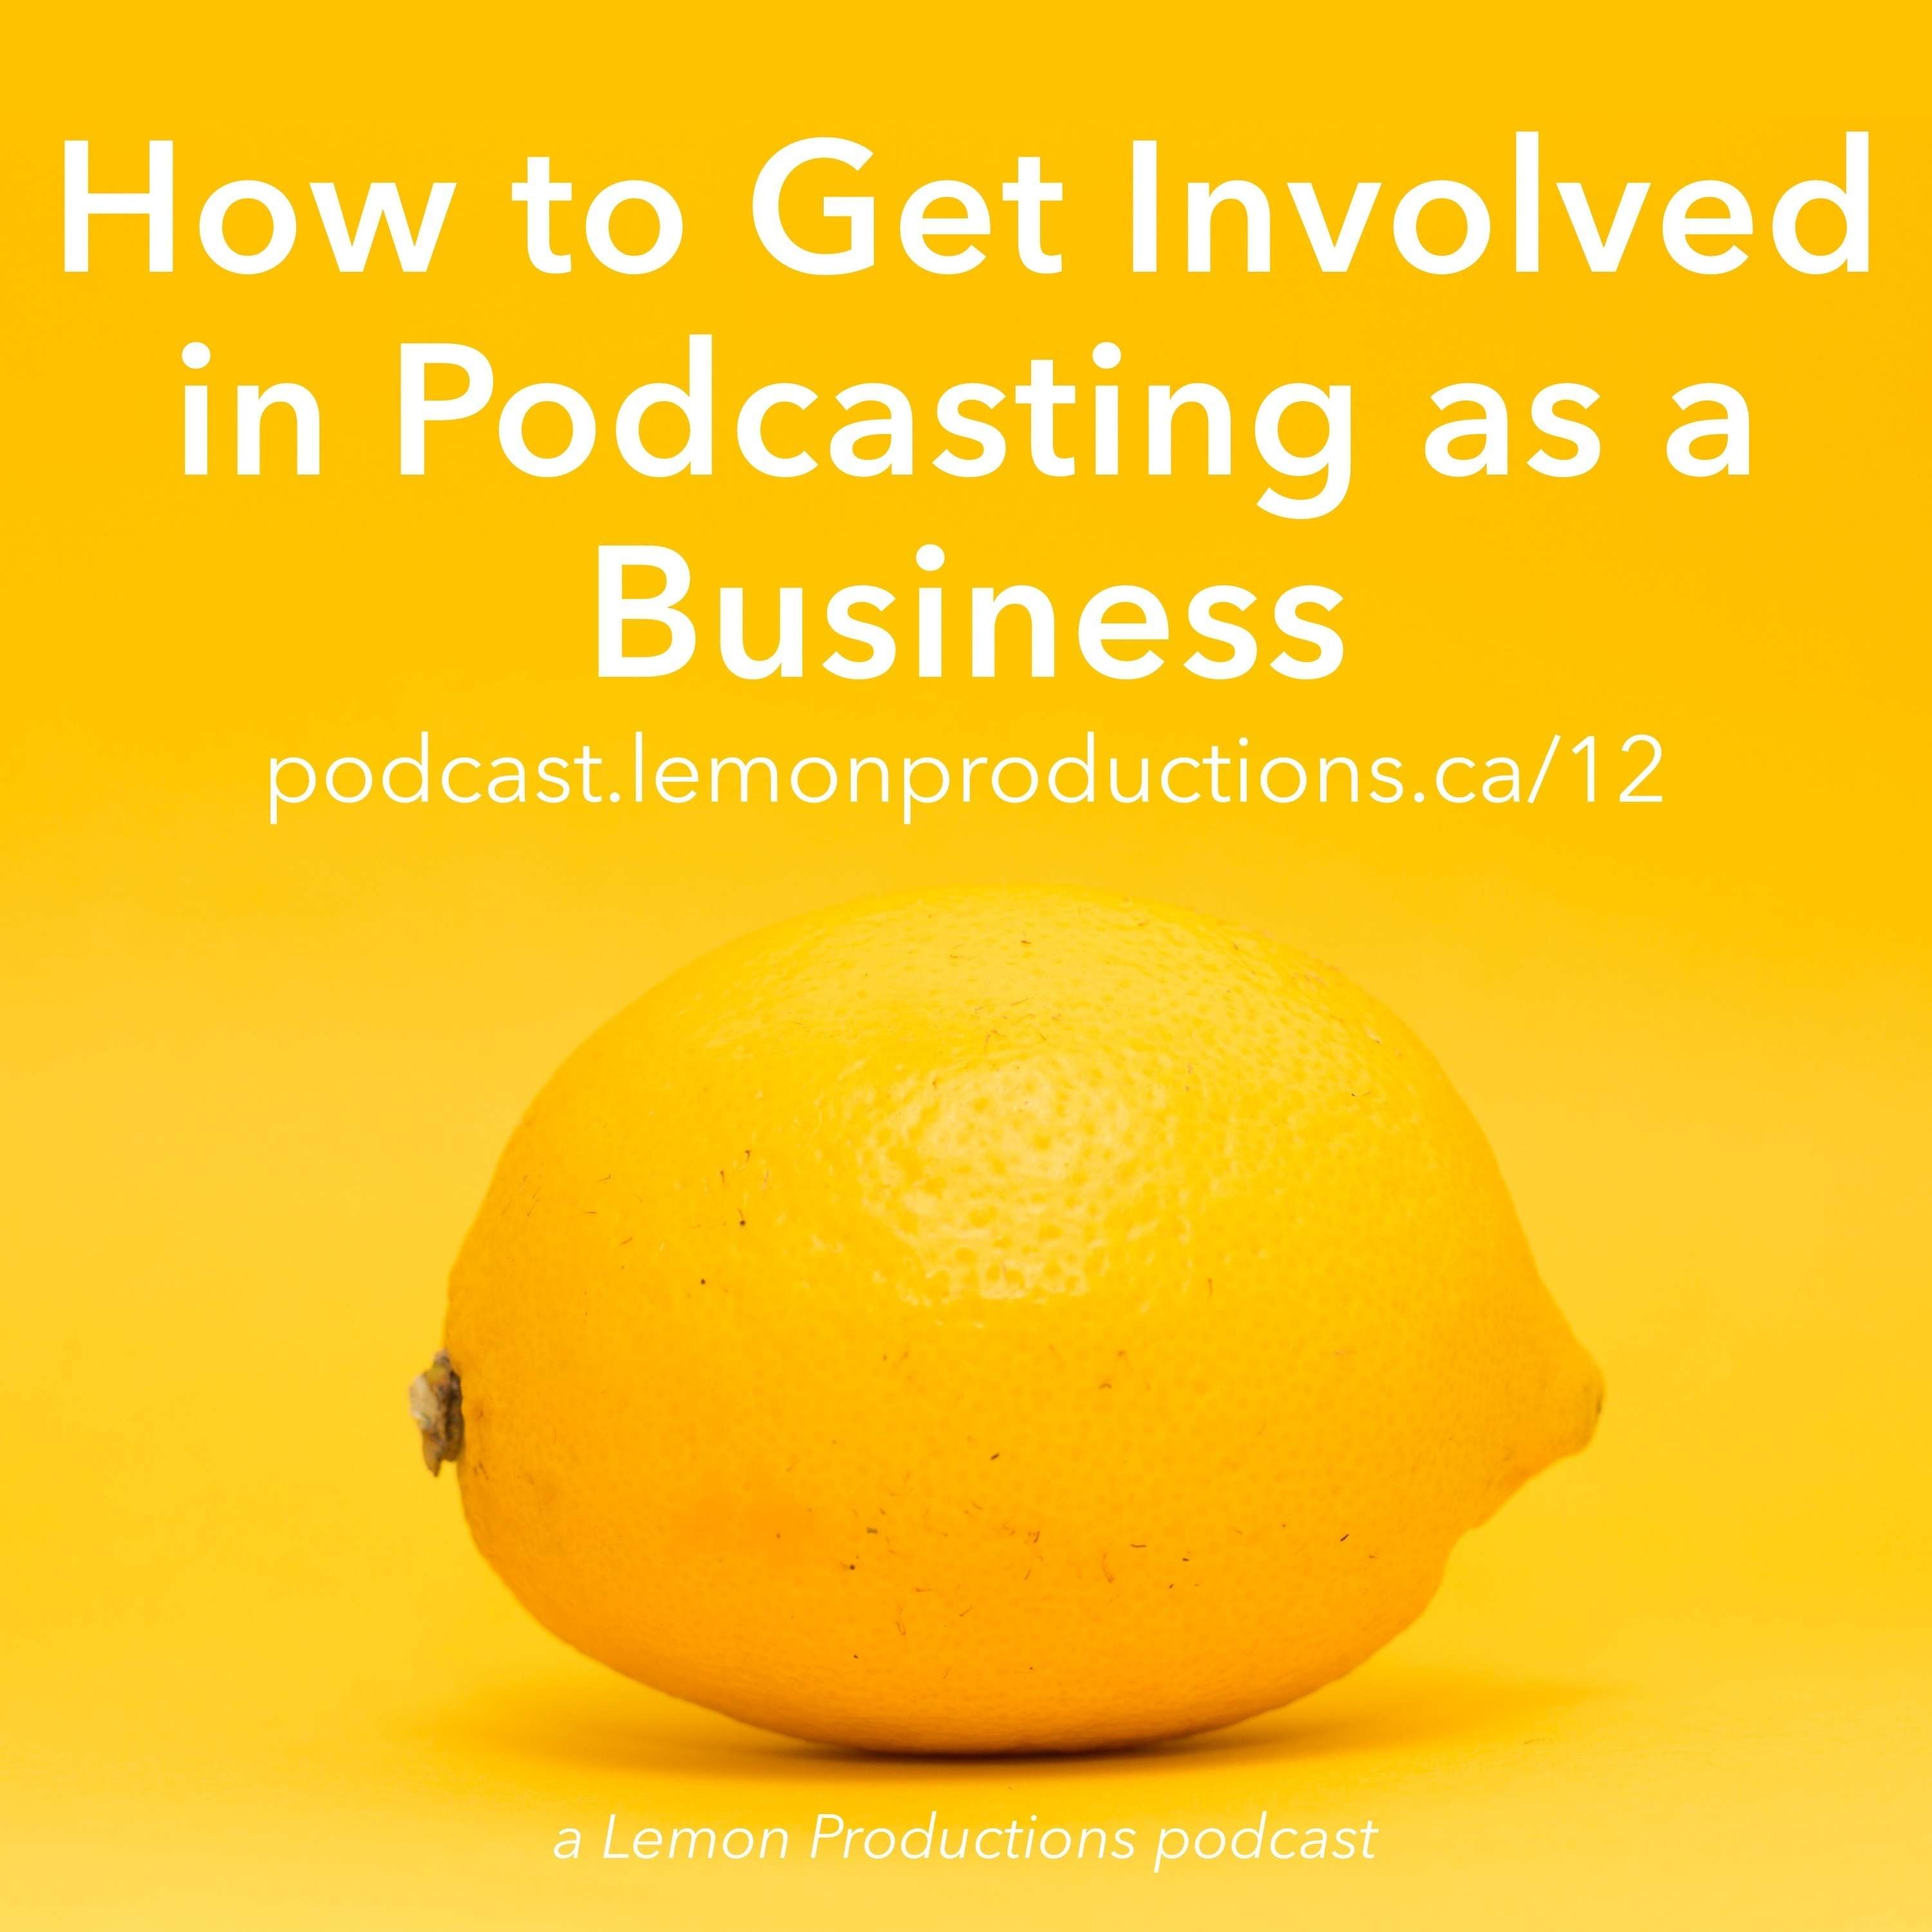 How to Get Involved in Podcasting as a Business